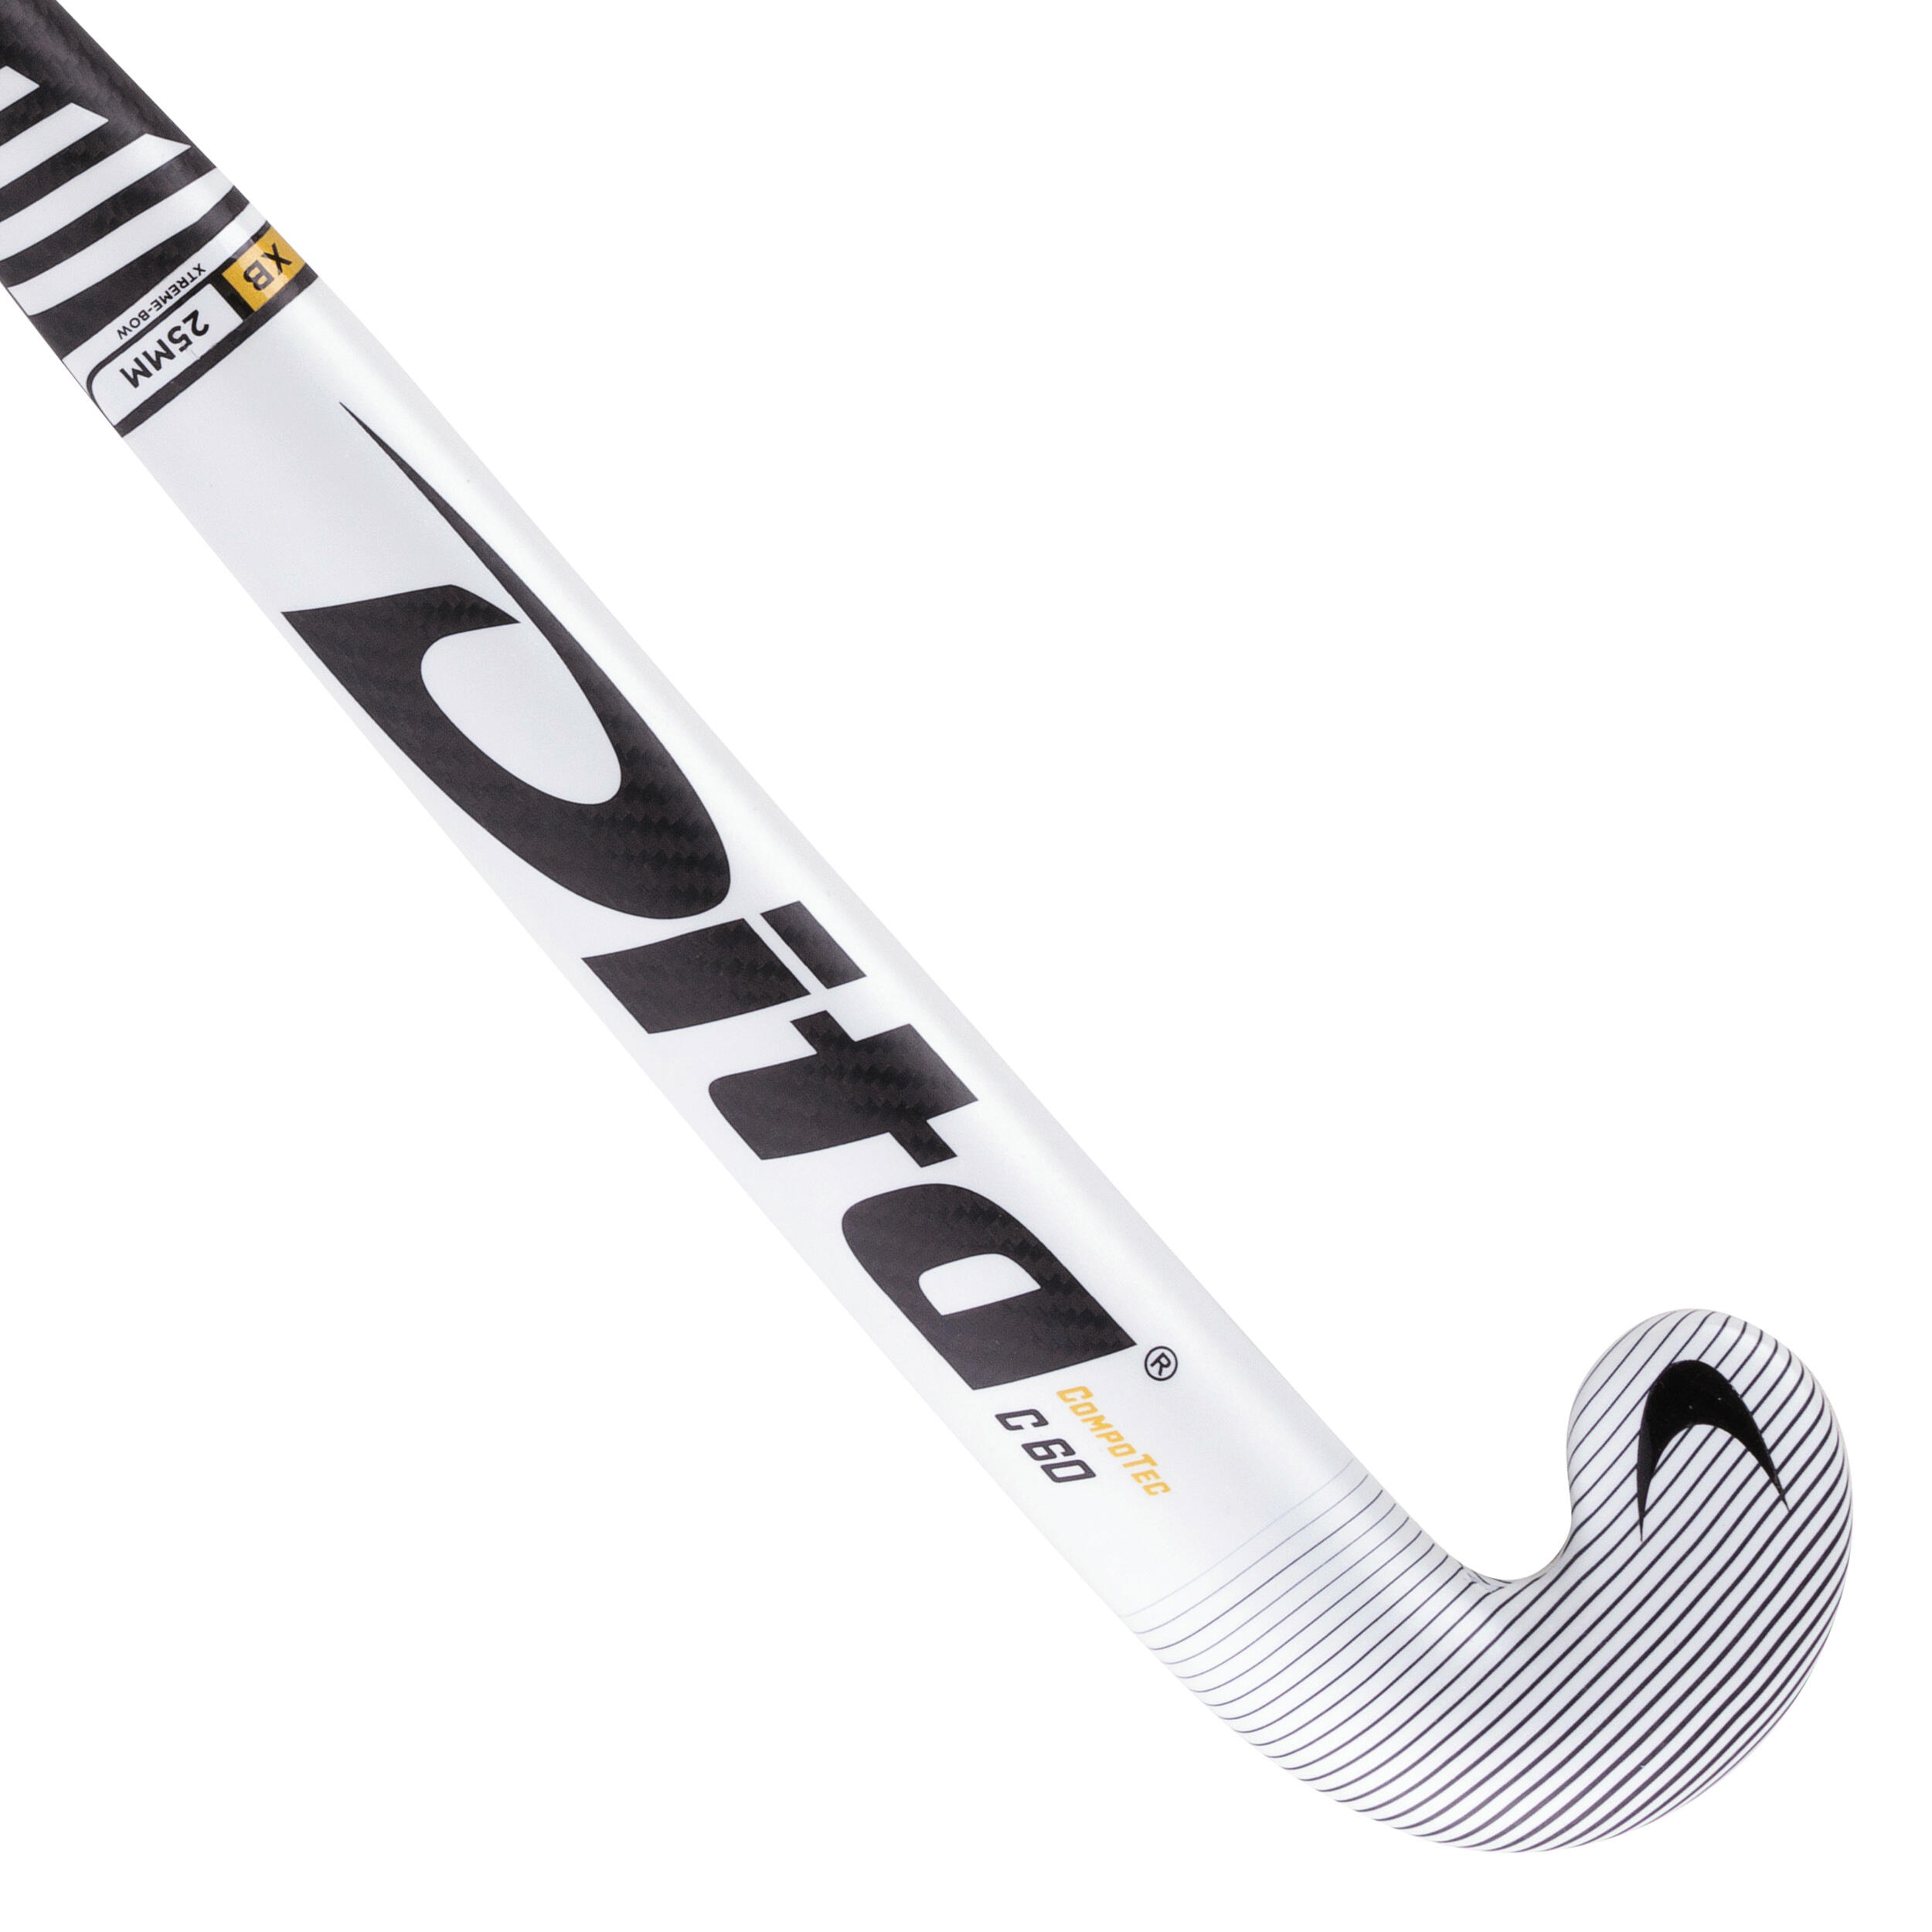 Adult Field Hockey Advanced 60% Carbon X-Low Bow Stick CompotecC60 - White/Black 9/12